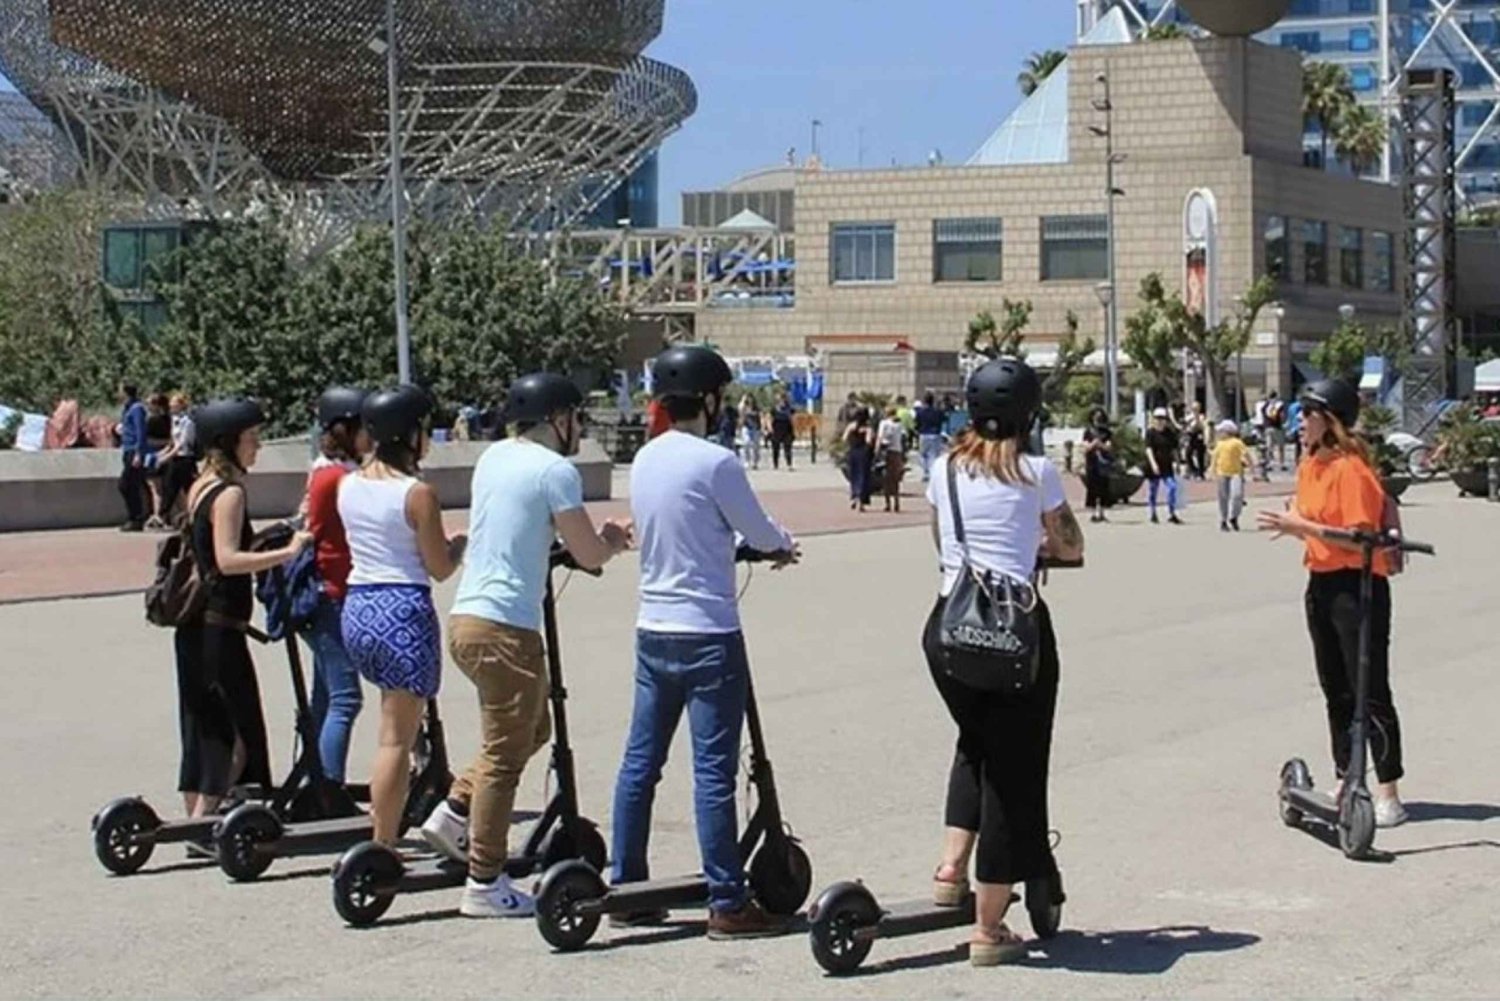 Electric Scooter Tour: Full Tour (Old Town + Shipyard) 2,5h